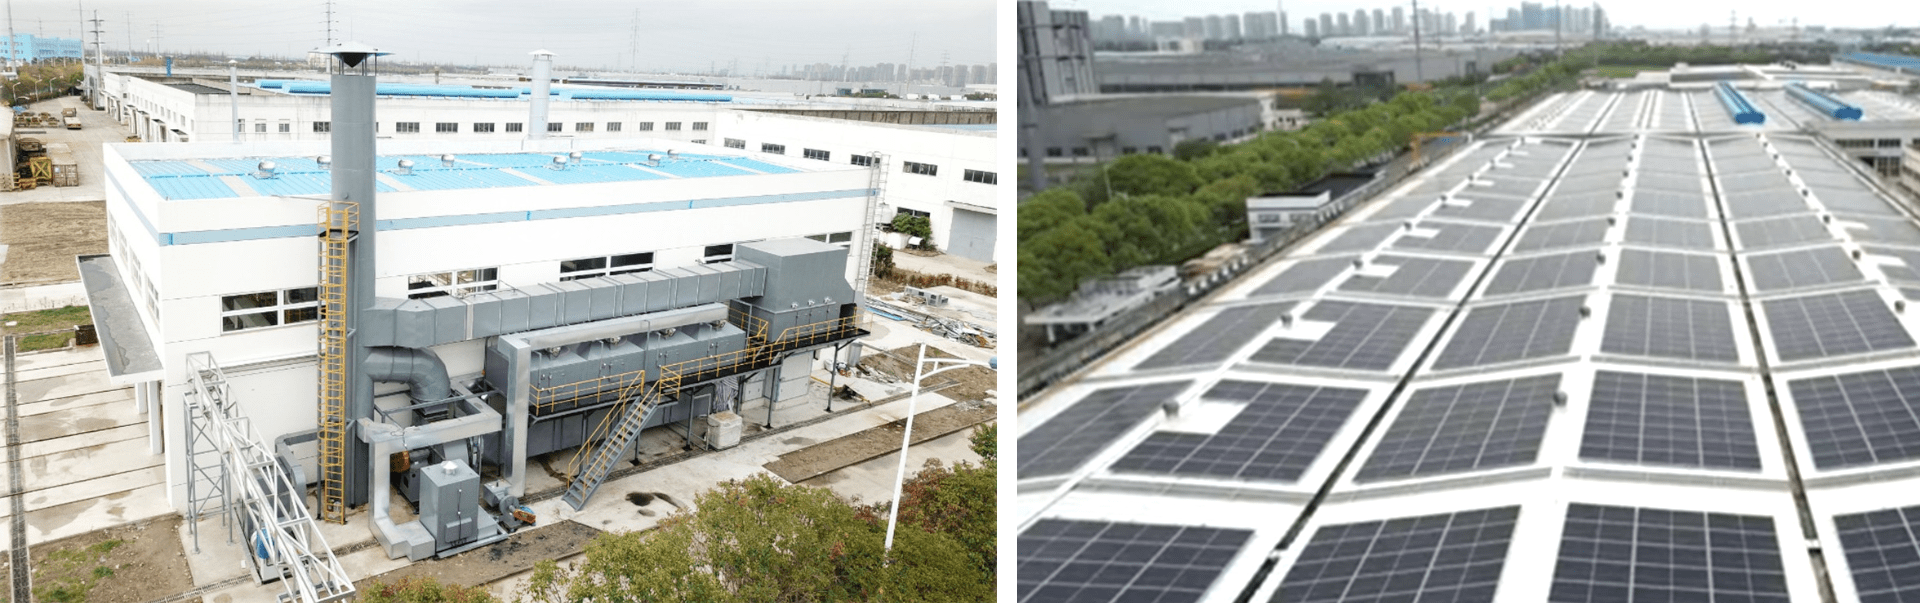 RAM Spreaders invest in solar energy for their factory.